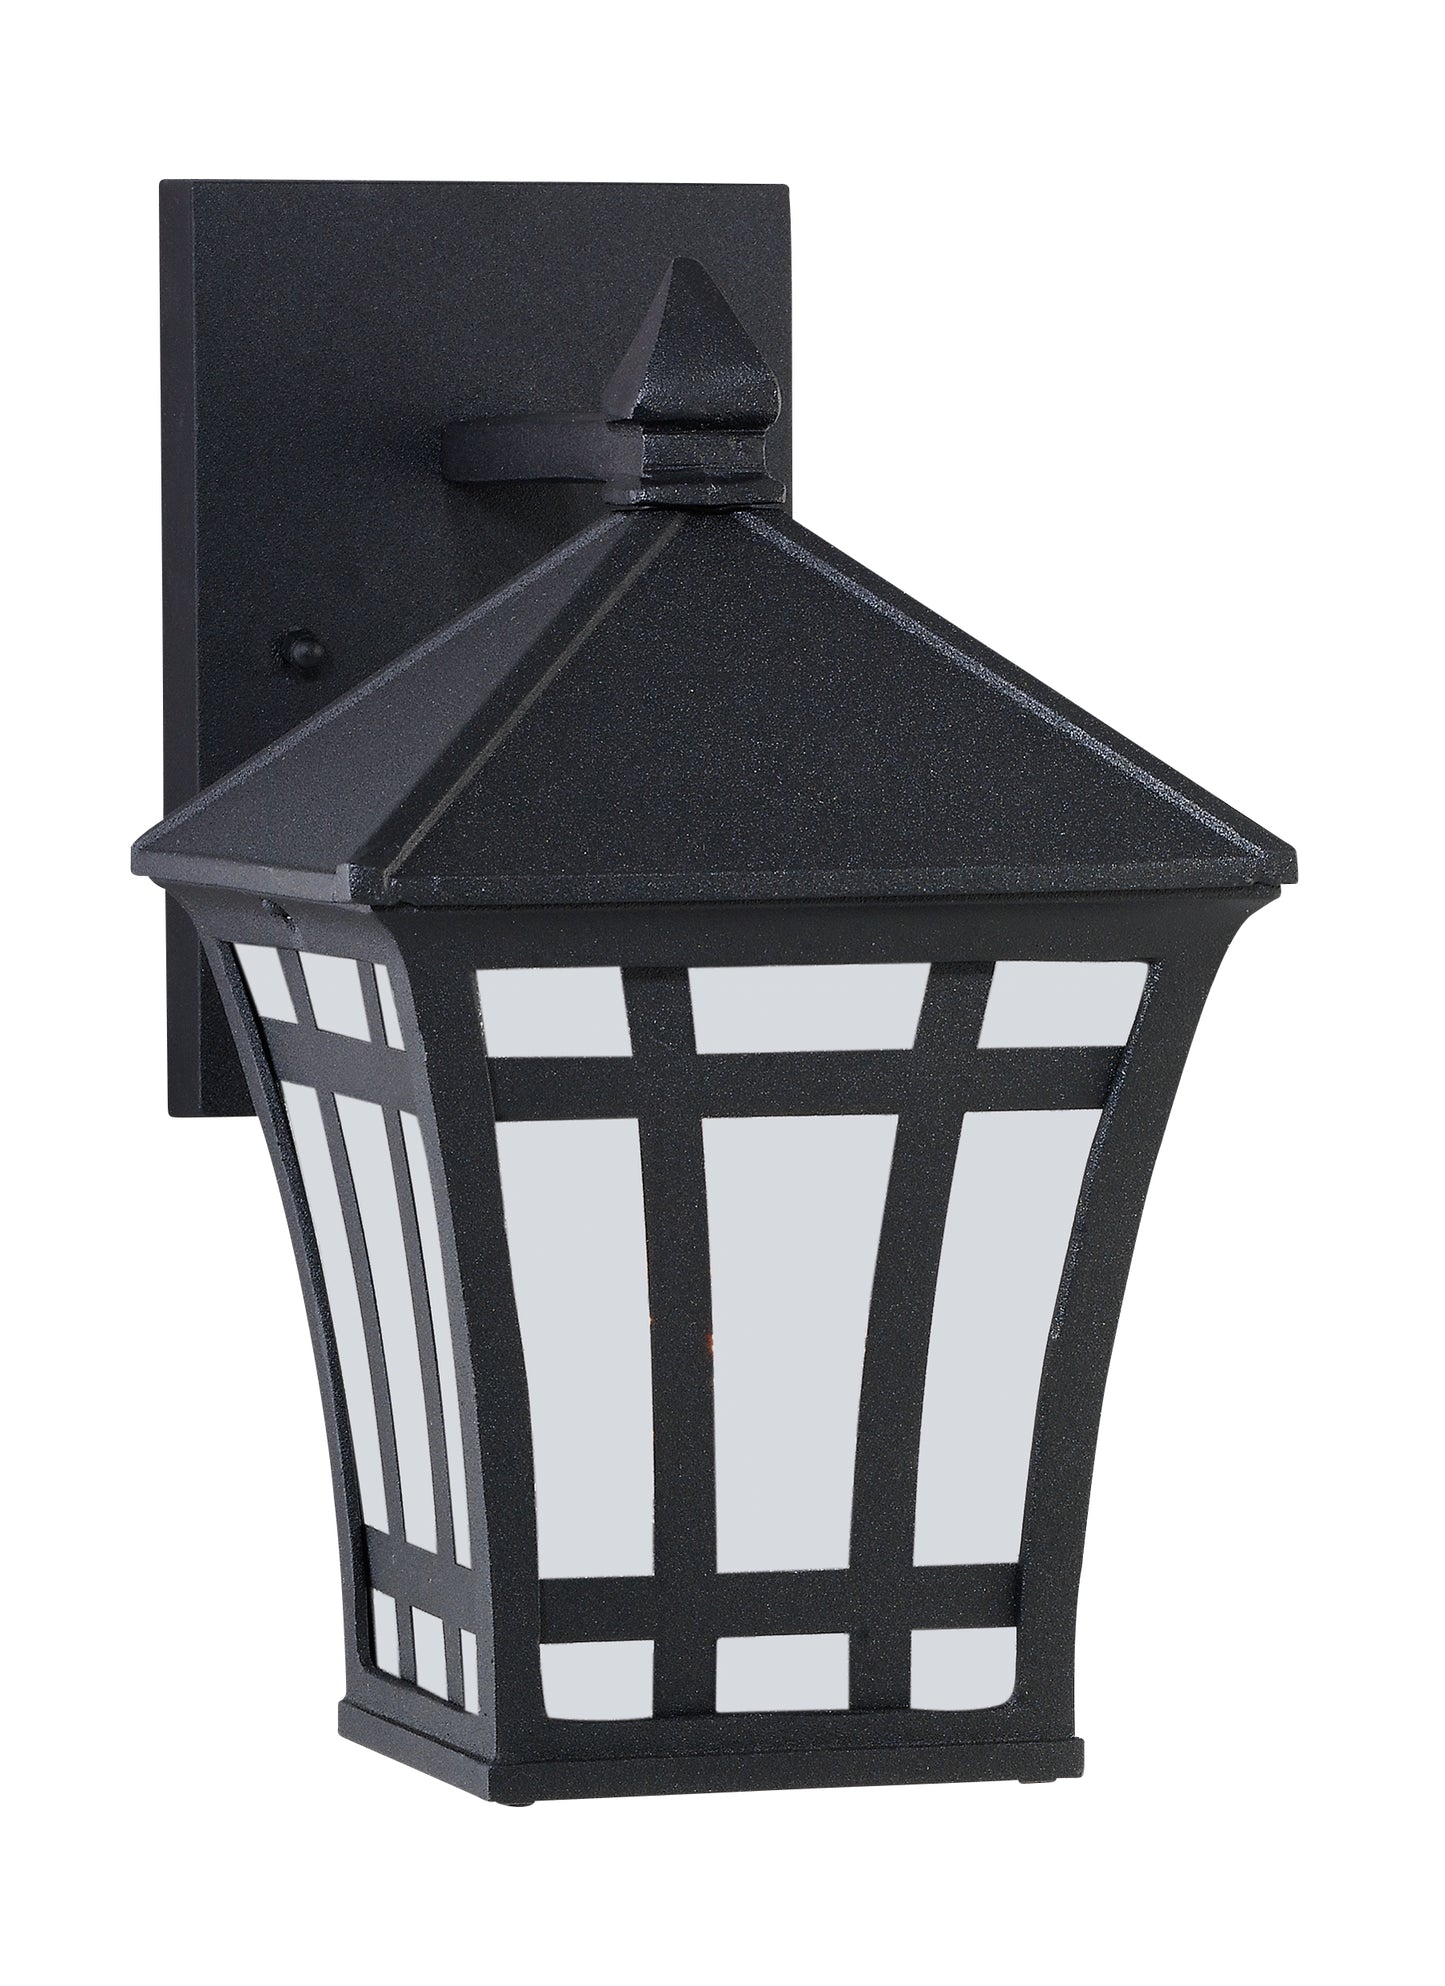 Herrington transitional 1-light outdoor exterior small wall lantern sconce in black finish with etched white glass panels